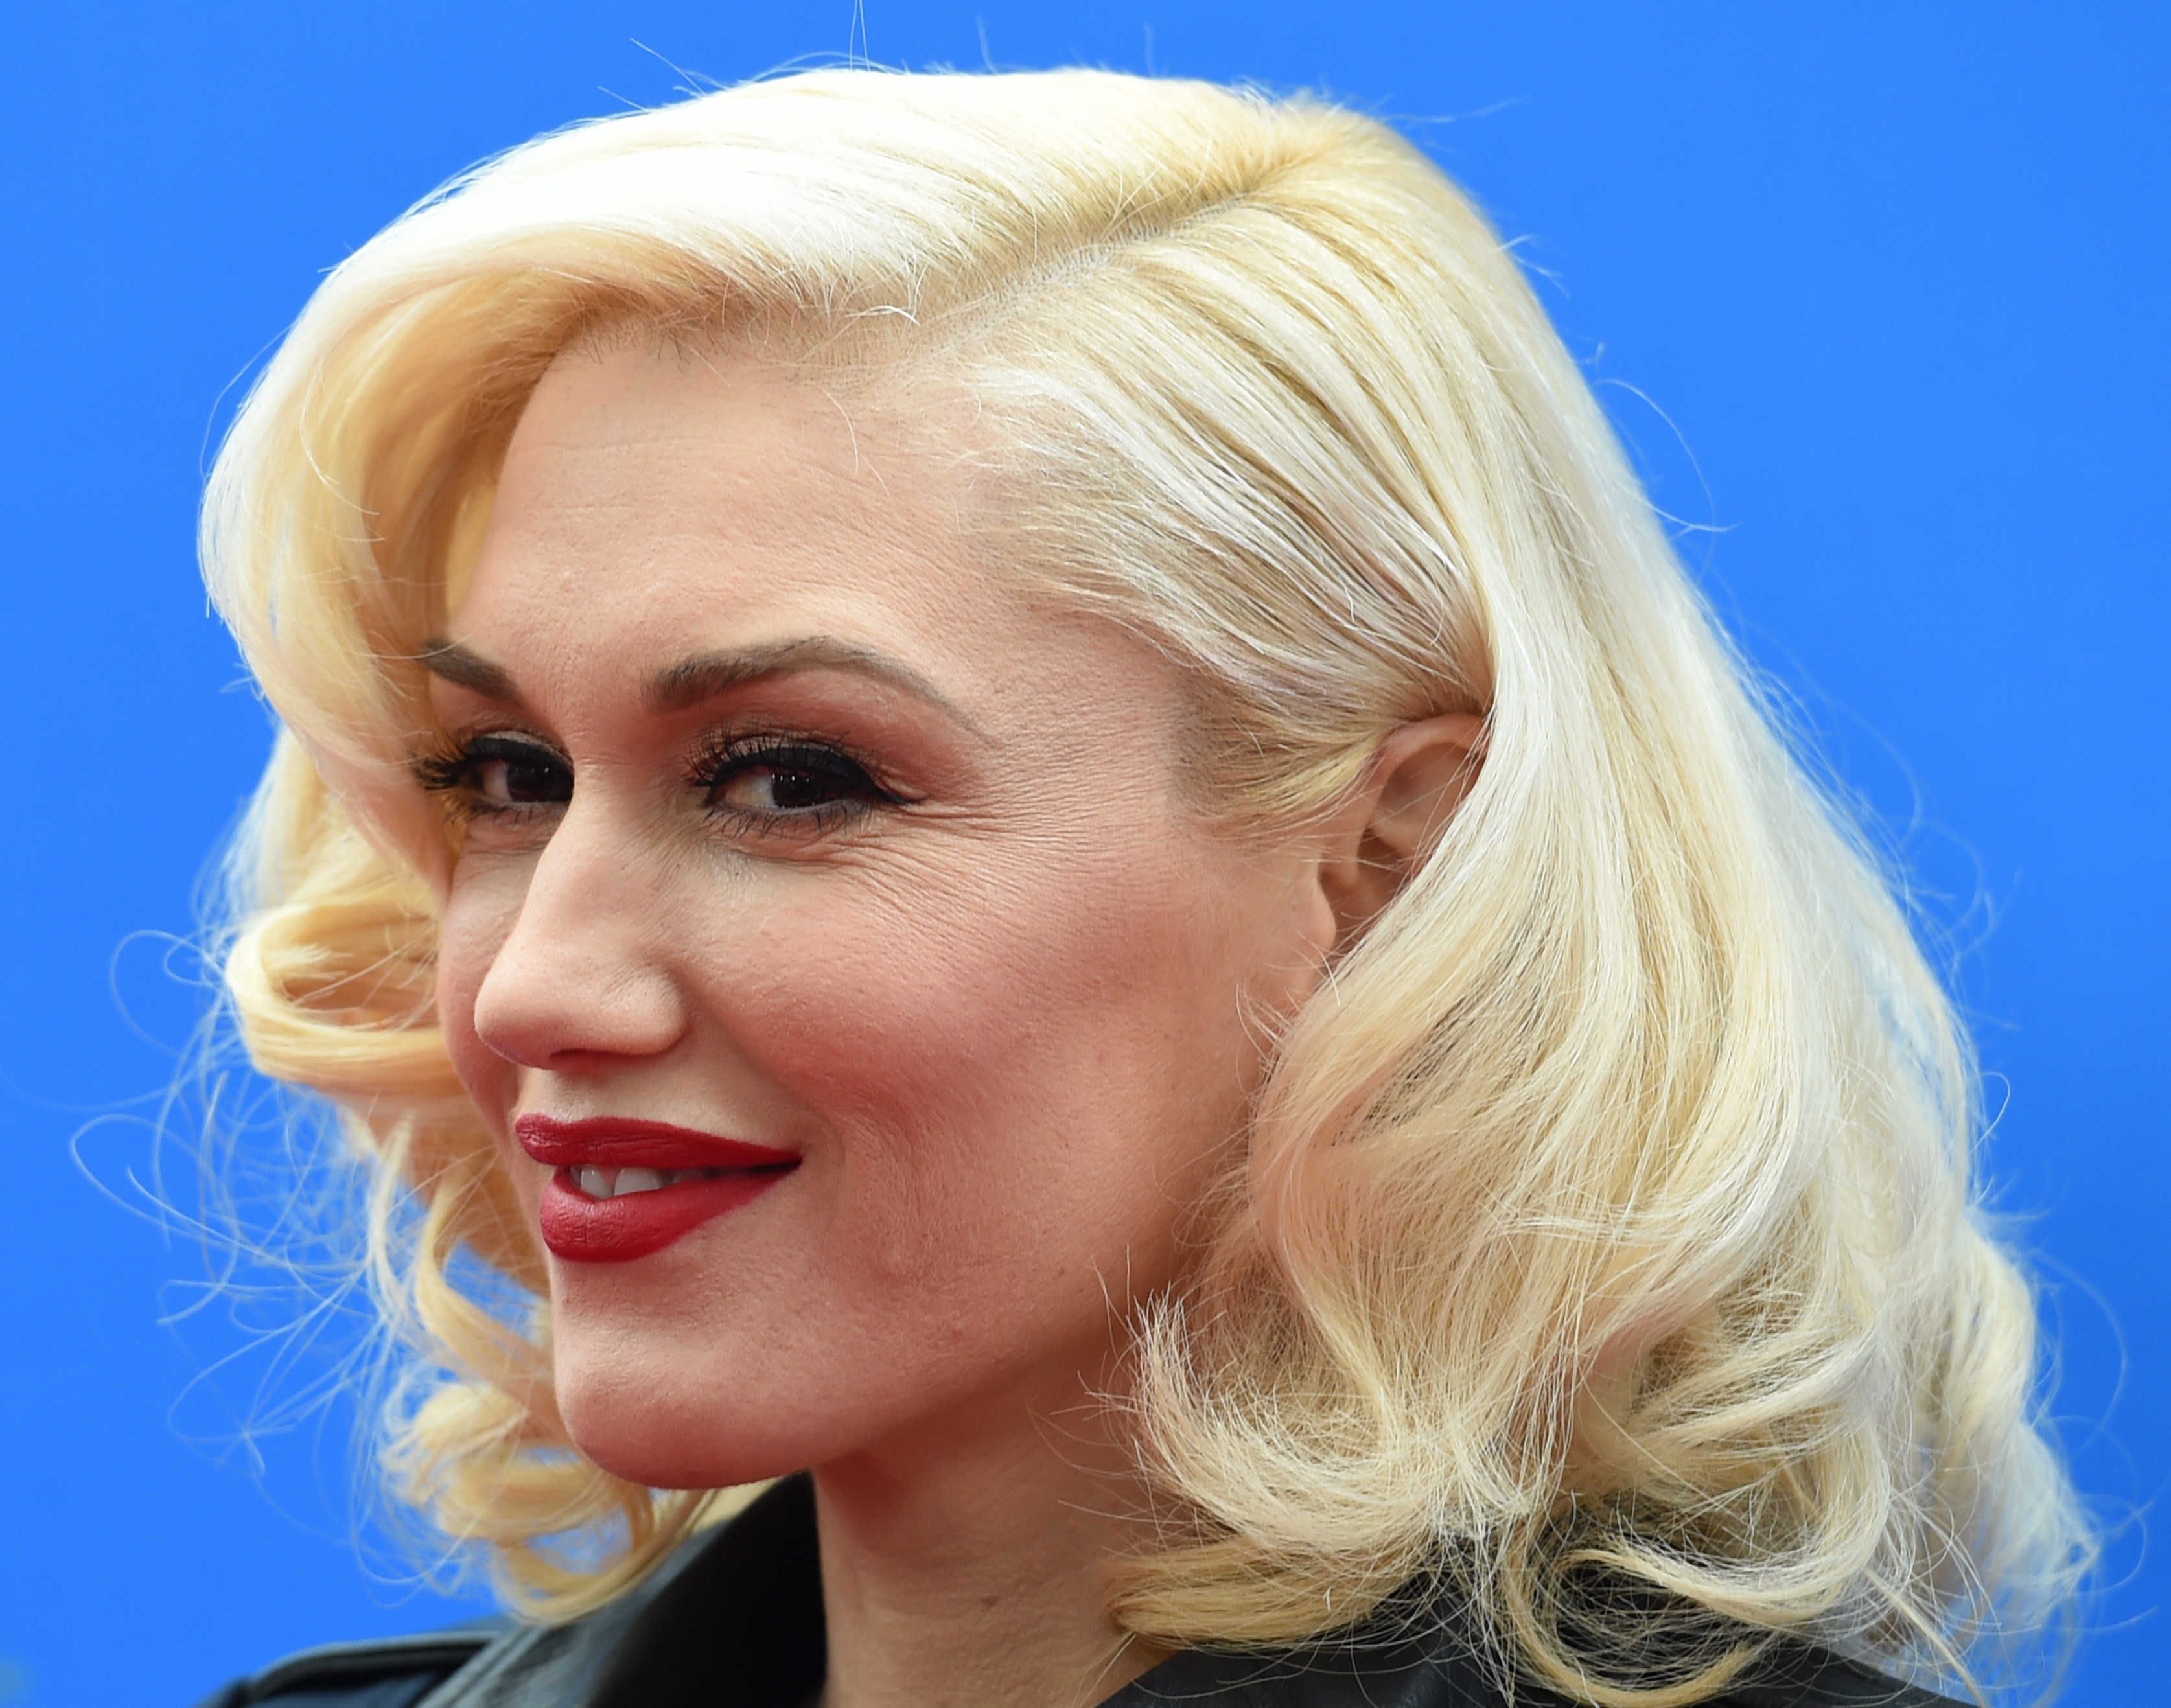 Gwen Stefani at the premiere of "Paddington" in Hollywood, California, on January 10, 2015 | Source: Getty Images